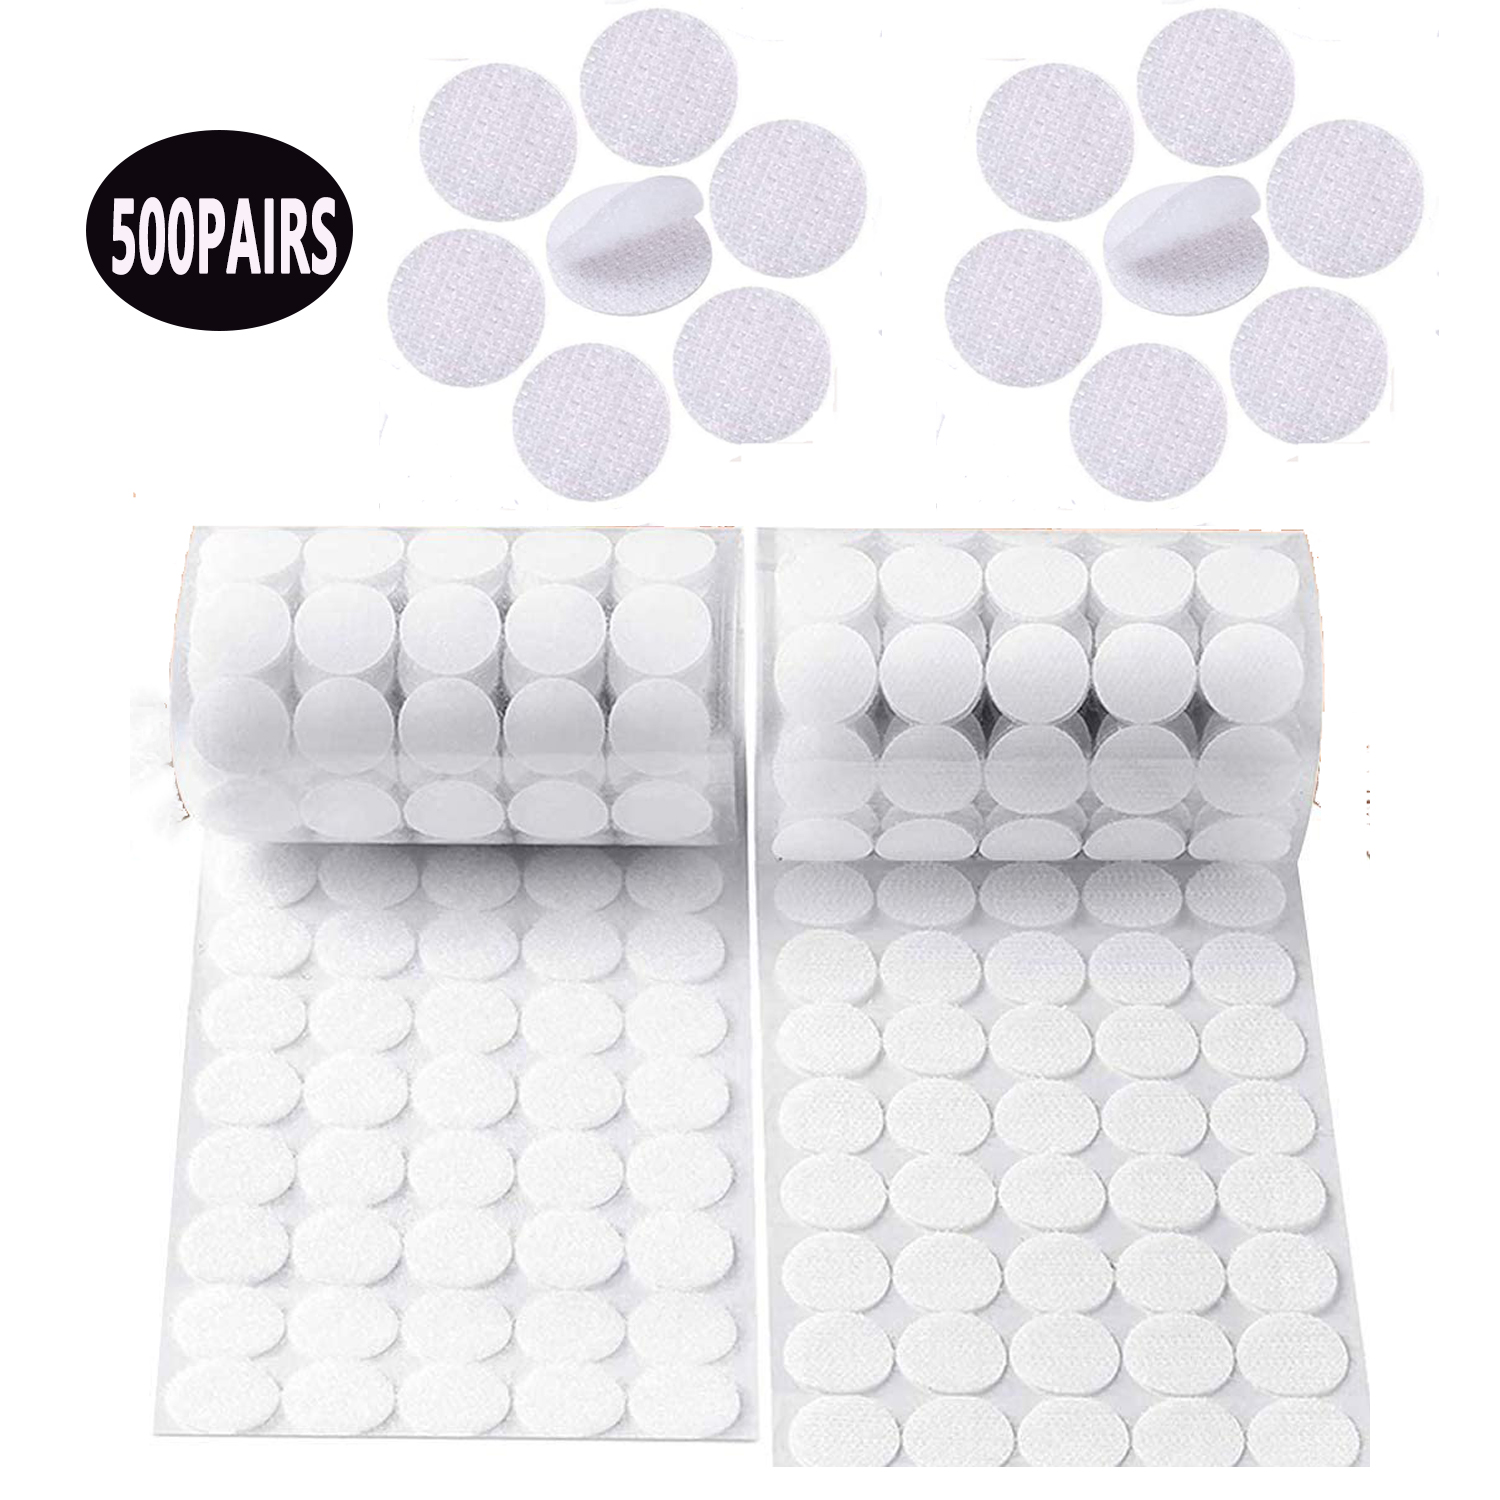 1000 Pcs 20mm Self-Adhesive Velcro Dots Glue Dots for Paper, Plastic,  Glass,Leather, Metal, Garments(White) 